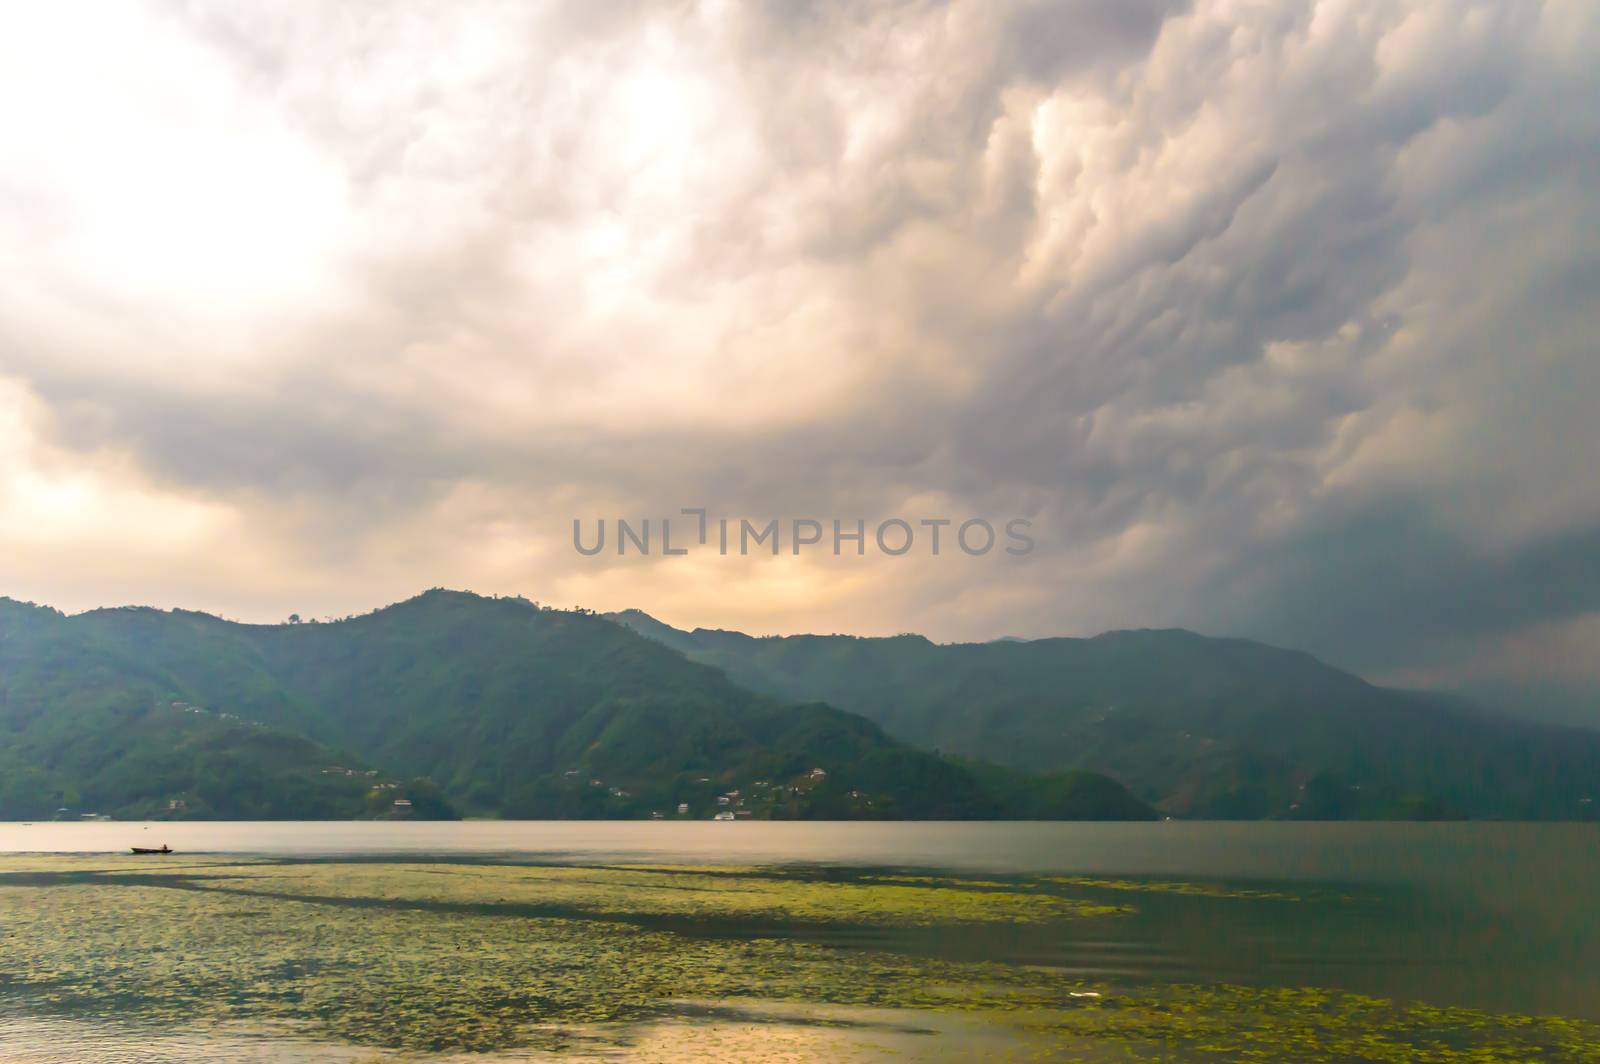 Photograph of cloud, lake, mountain and reflexion Near Pokhara Lake at Kathmandu Nepal. Snap in portrait, landscape, wide screen. Vintage film look. Nature Freedom, Vivid, Energy, Environment Concept. by sudiptabhowmick